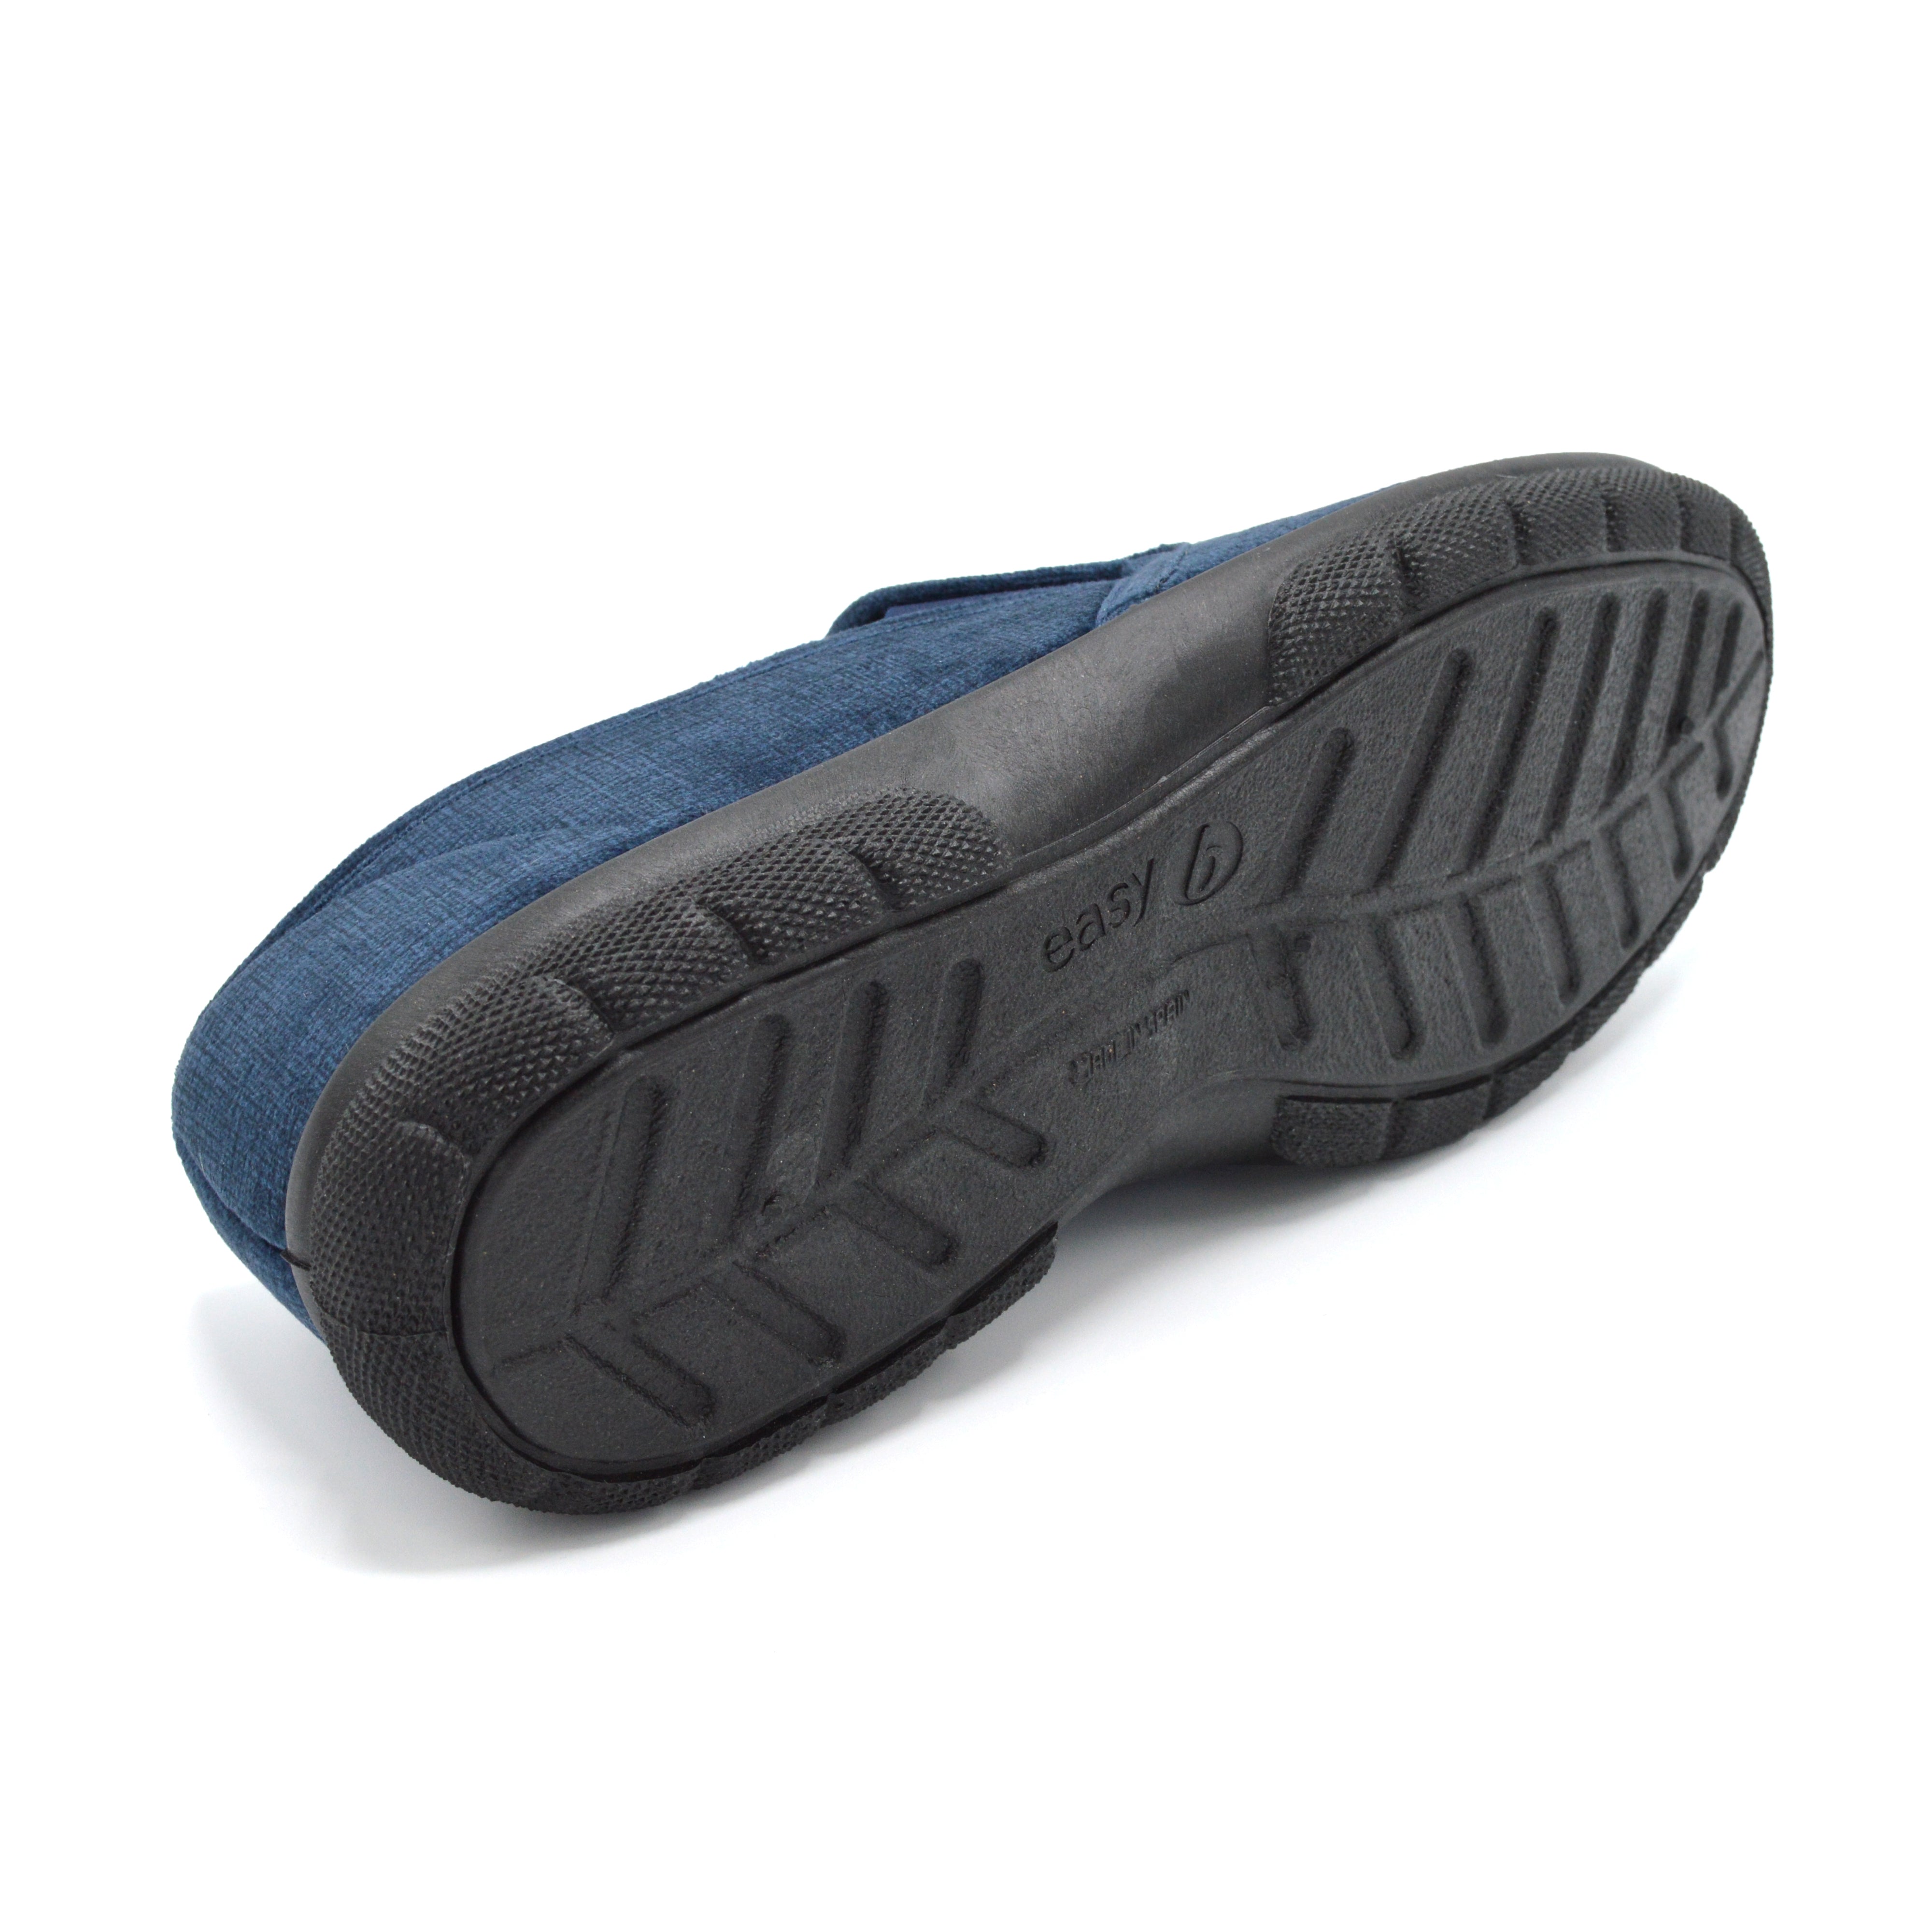 Navy Slip-On House Shoe For Gout